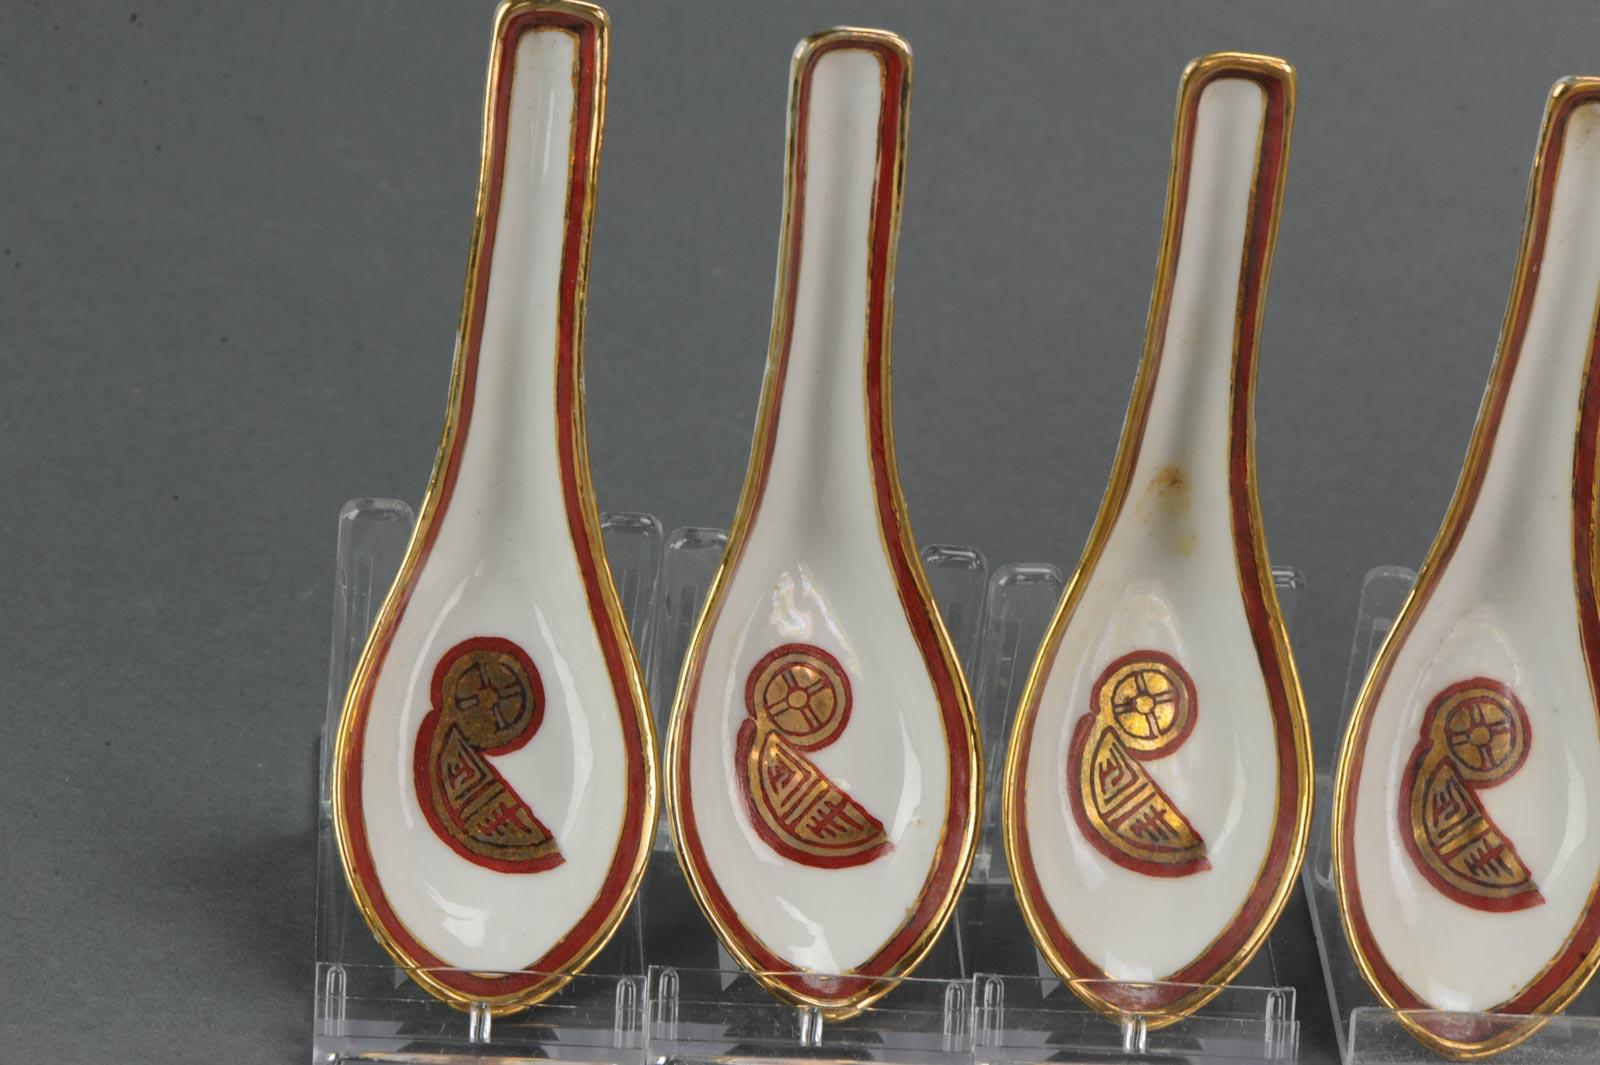 Set of 10 Chinese Porcelain Spoons South East Asian Market, Mid 20th Century In Good Condition For Sale In Amsterdam, Noord Holland